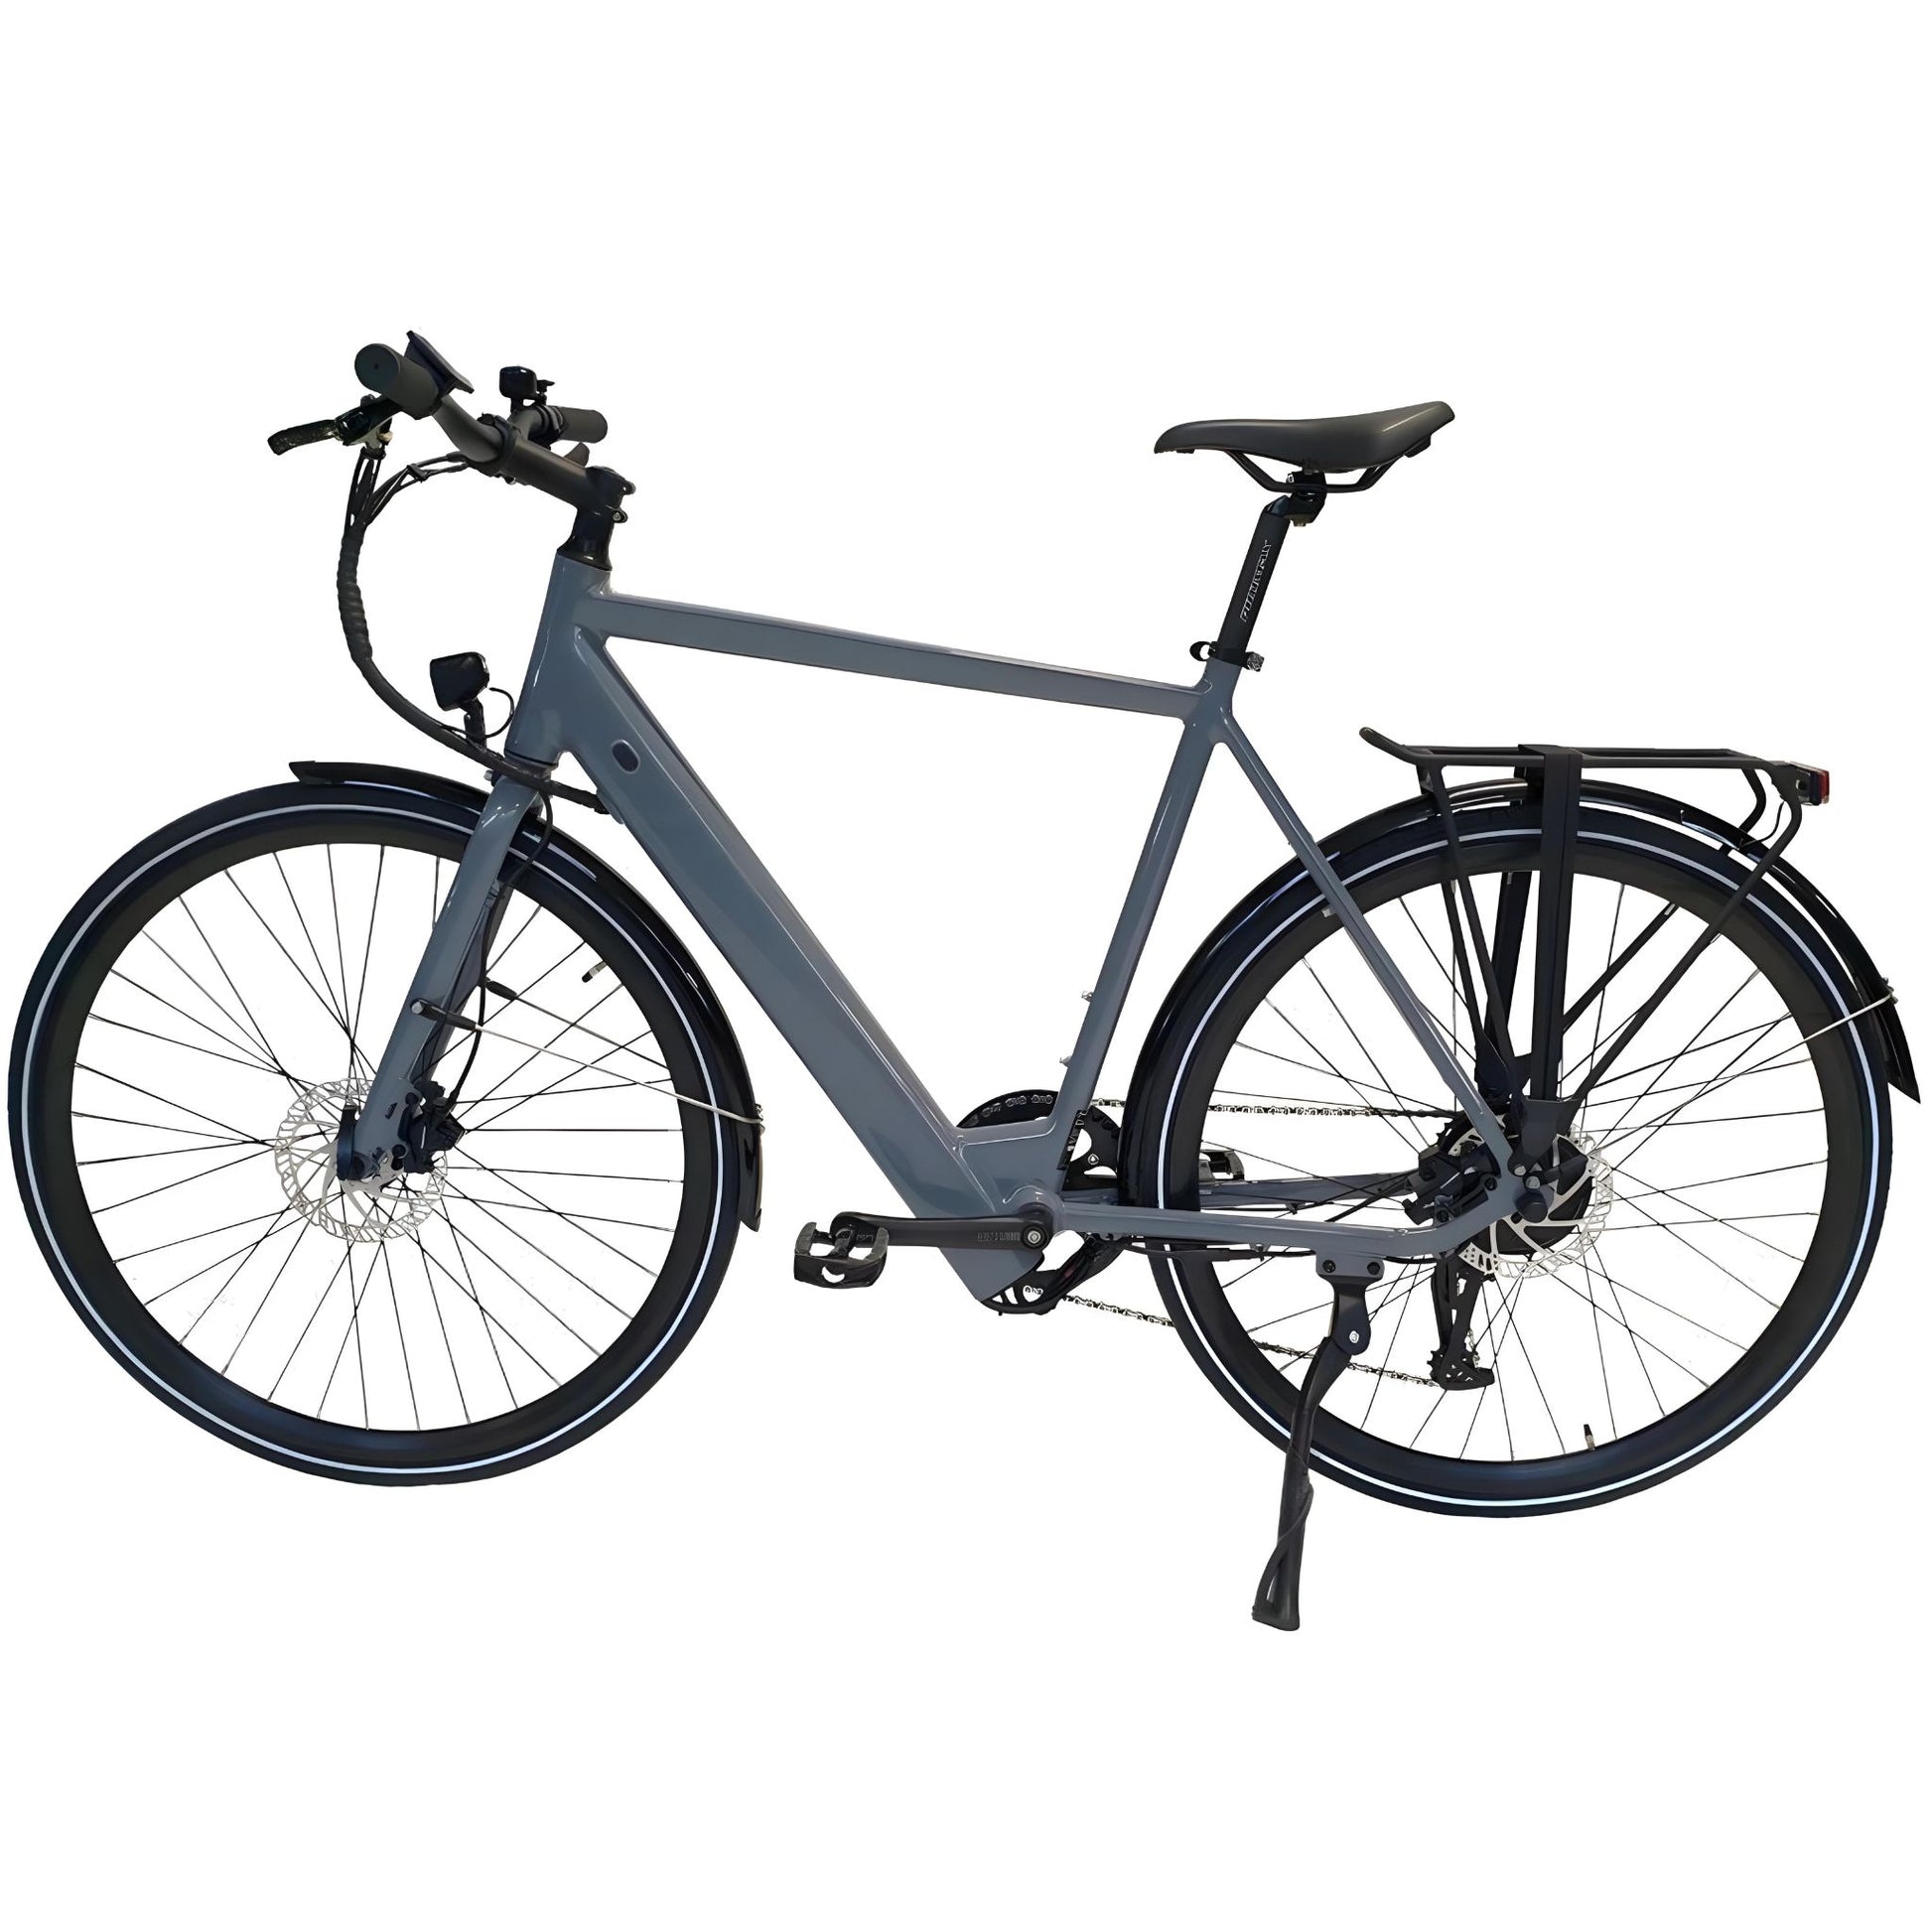 Full side view of Geobike E-Urban electric bicycle